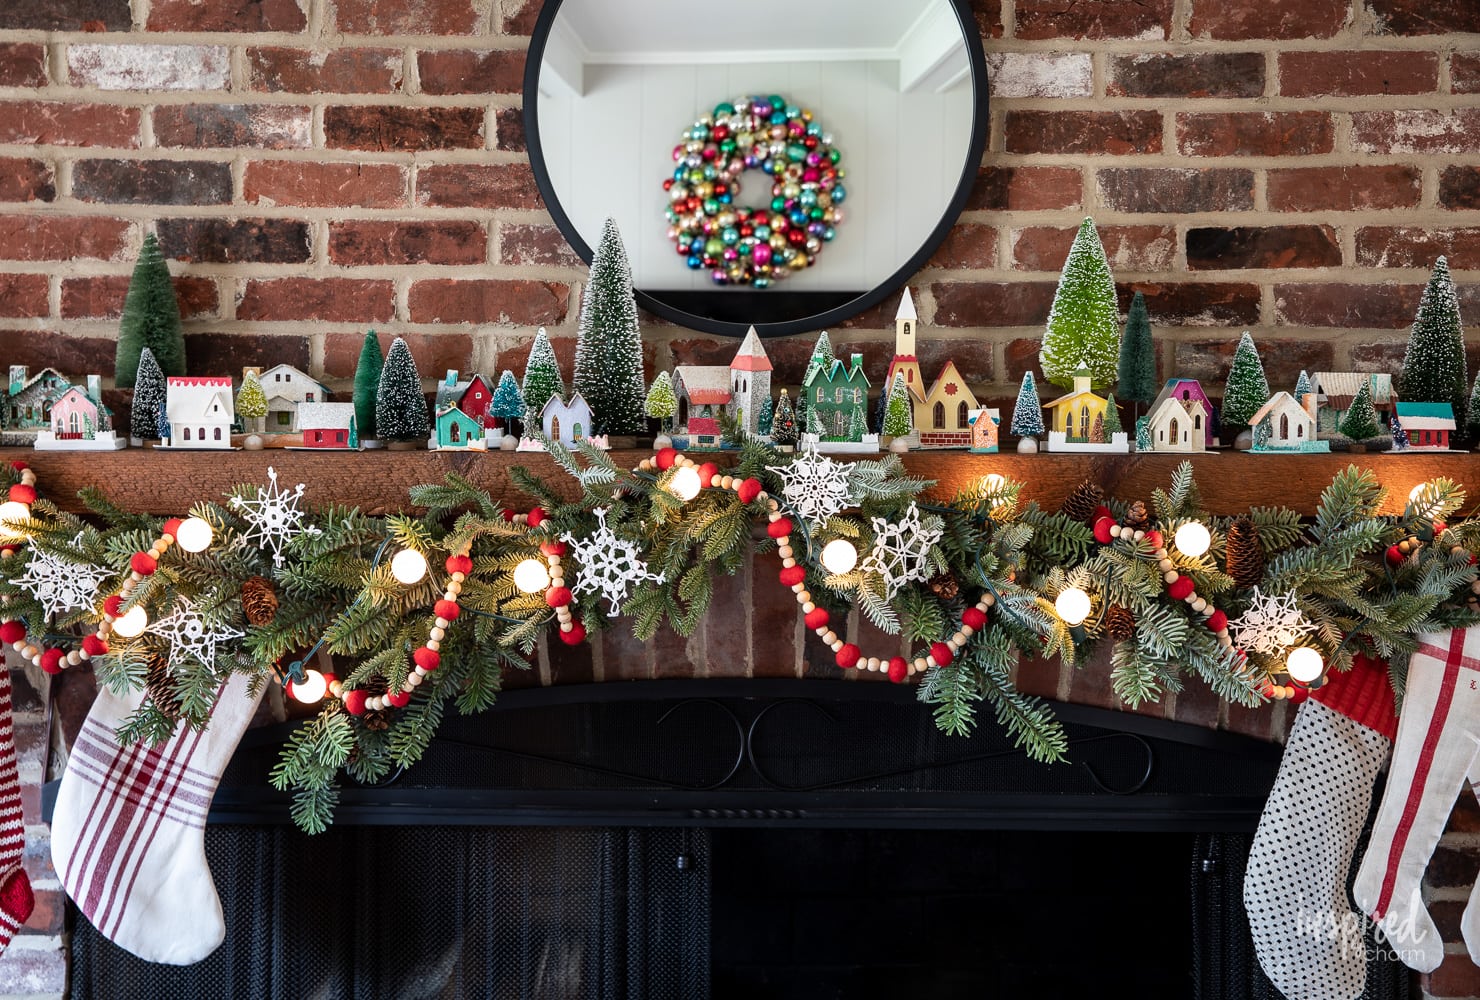 Putz House Christmas Mantel decorated with garland and vintage putz houses.